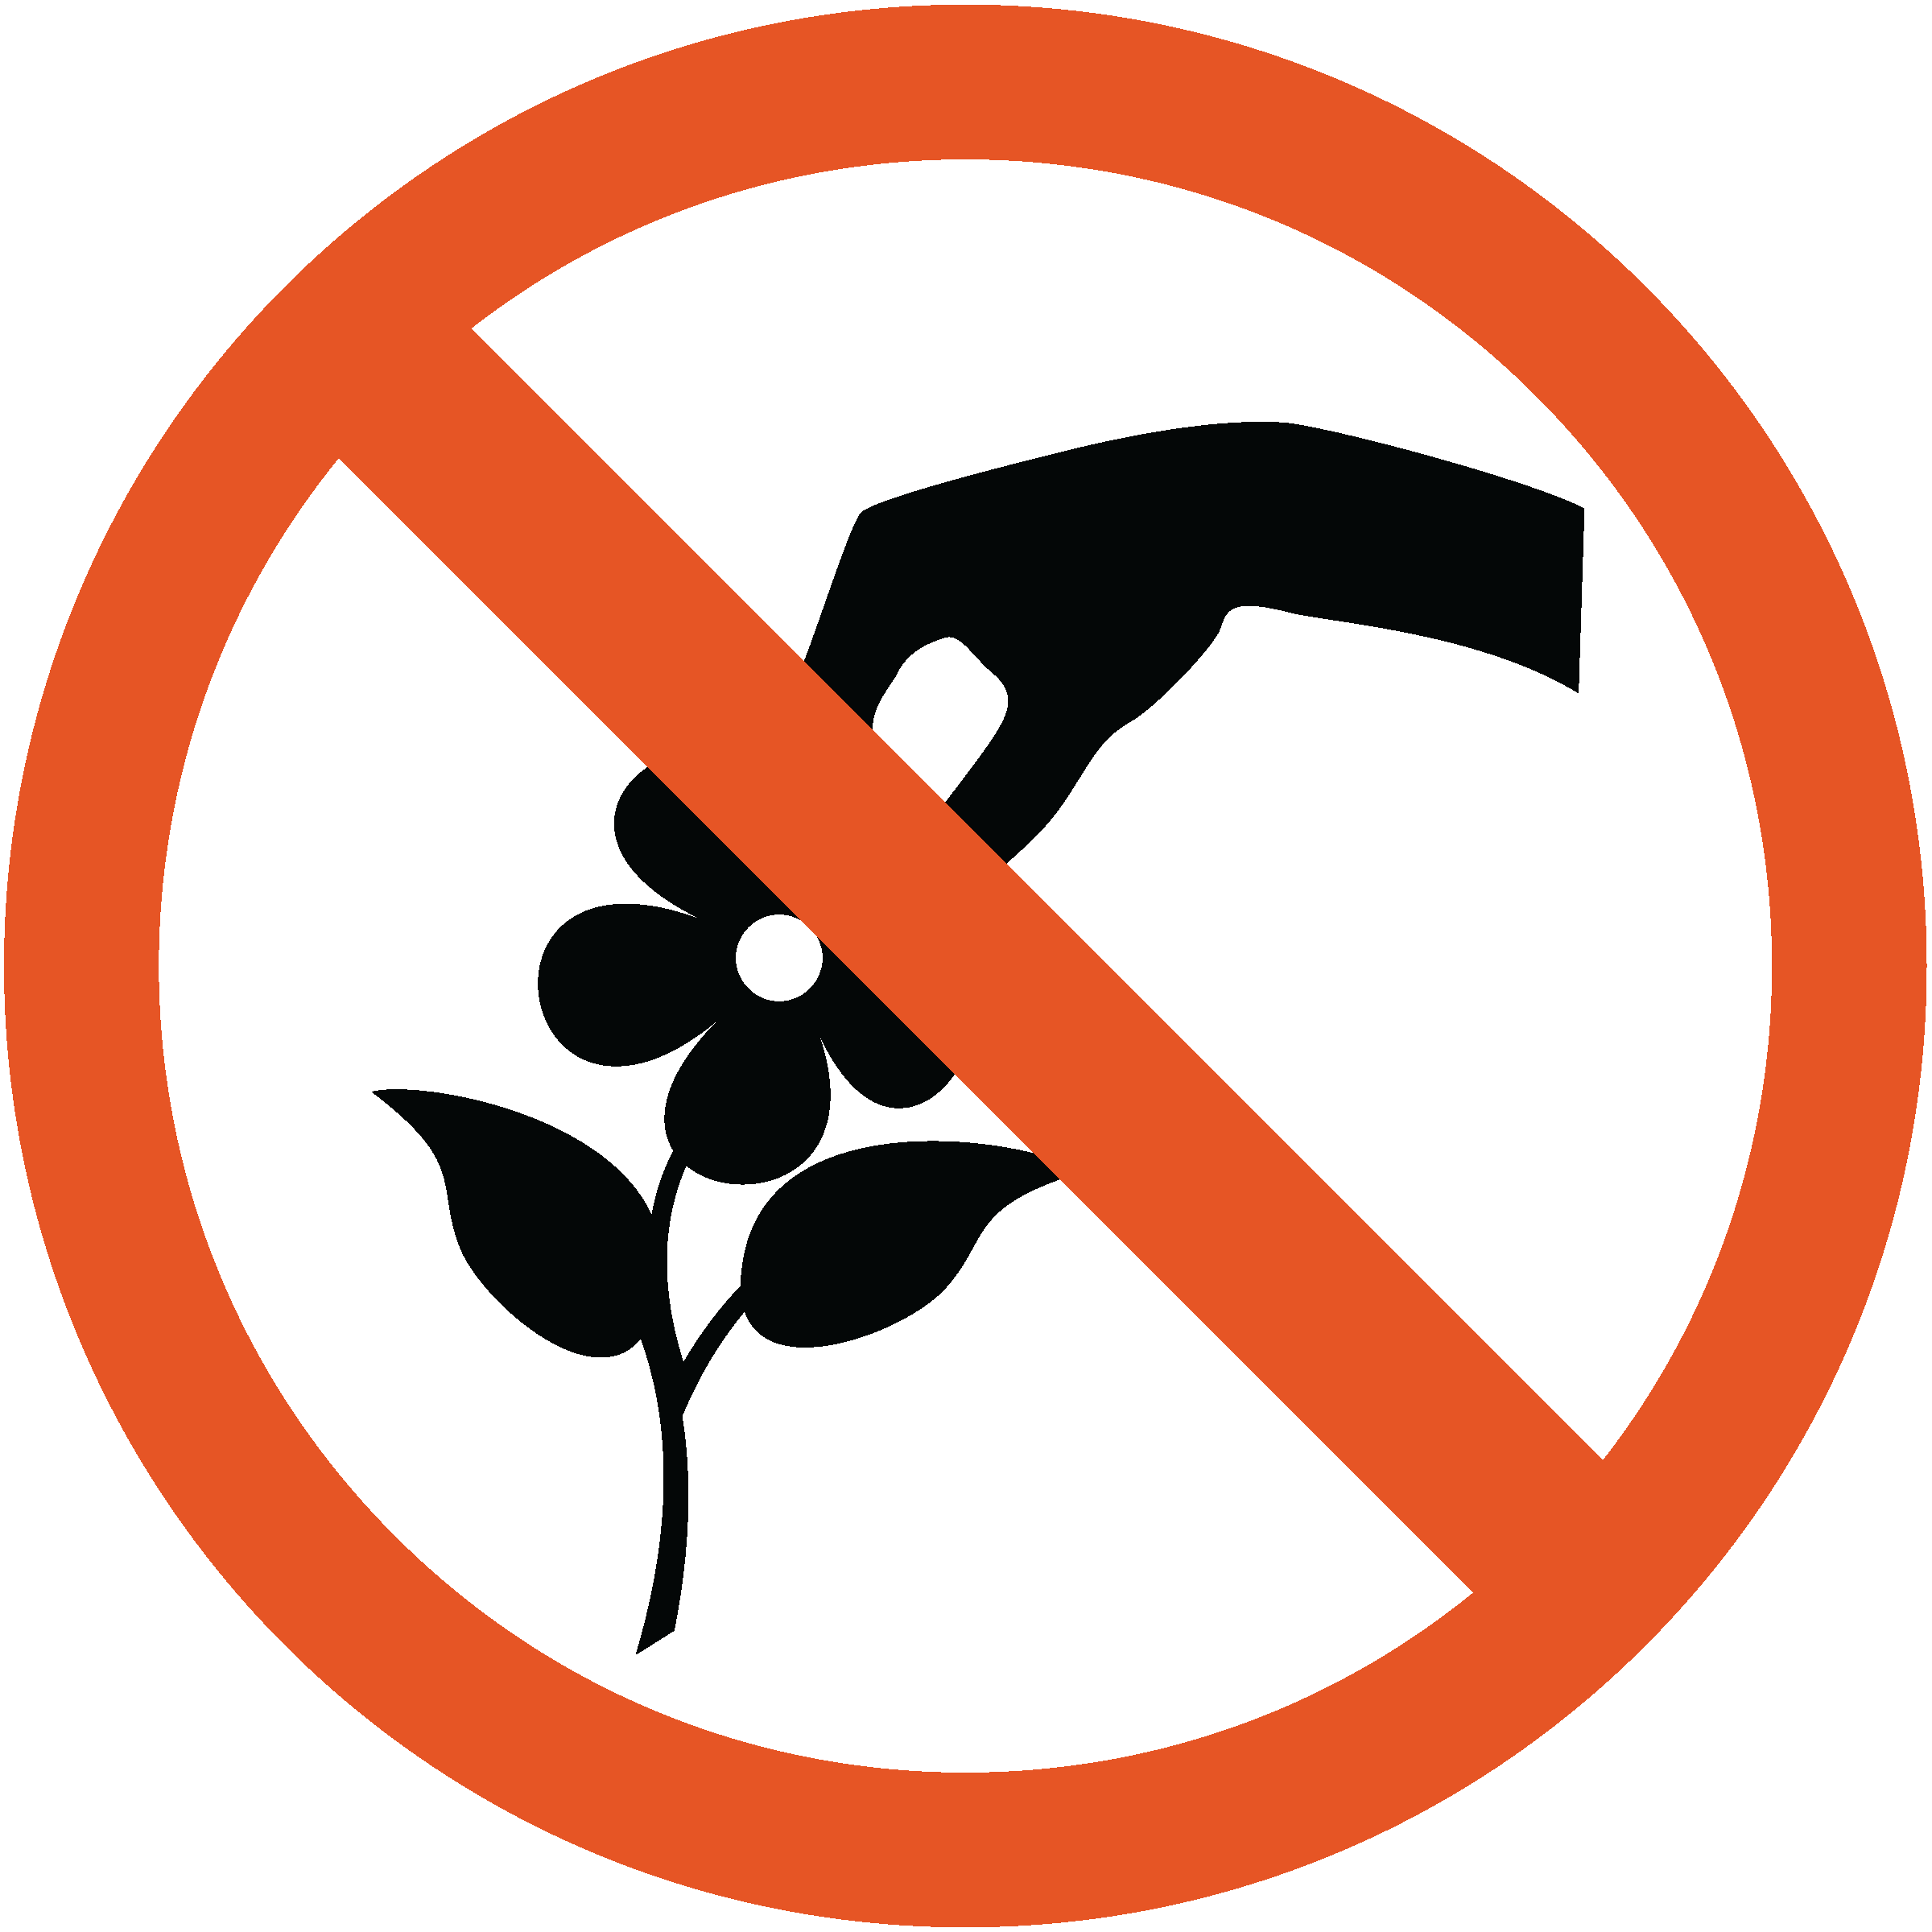 icon of no symbol over hand picking flower